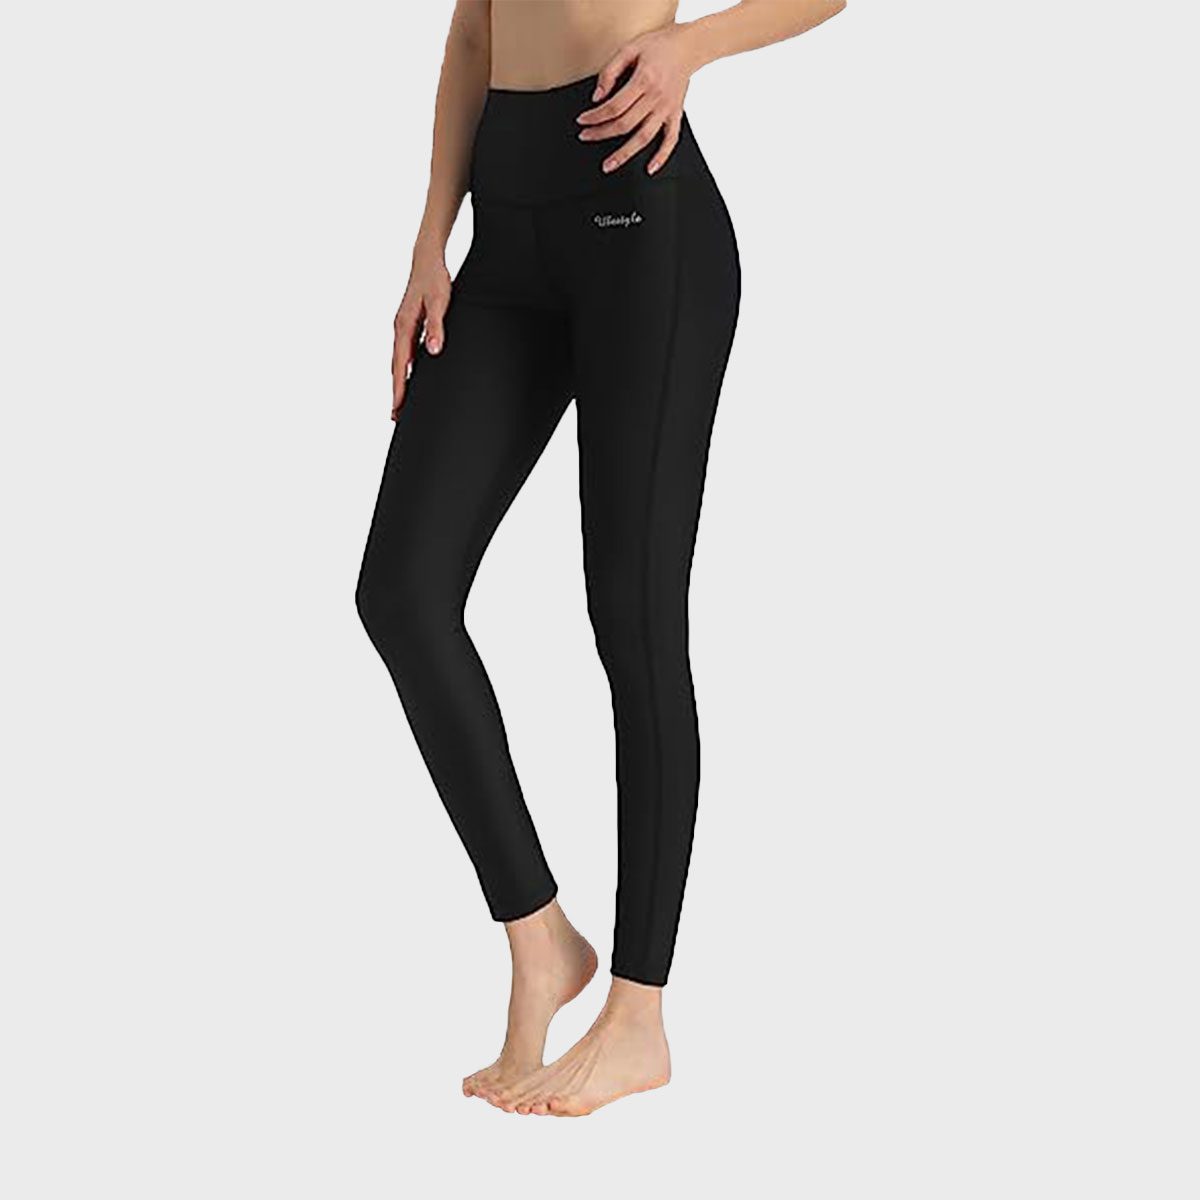 Sunrain Yoga Pants Compatible With Women With Pockets High Waisted